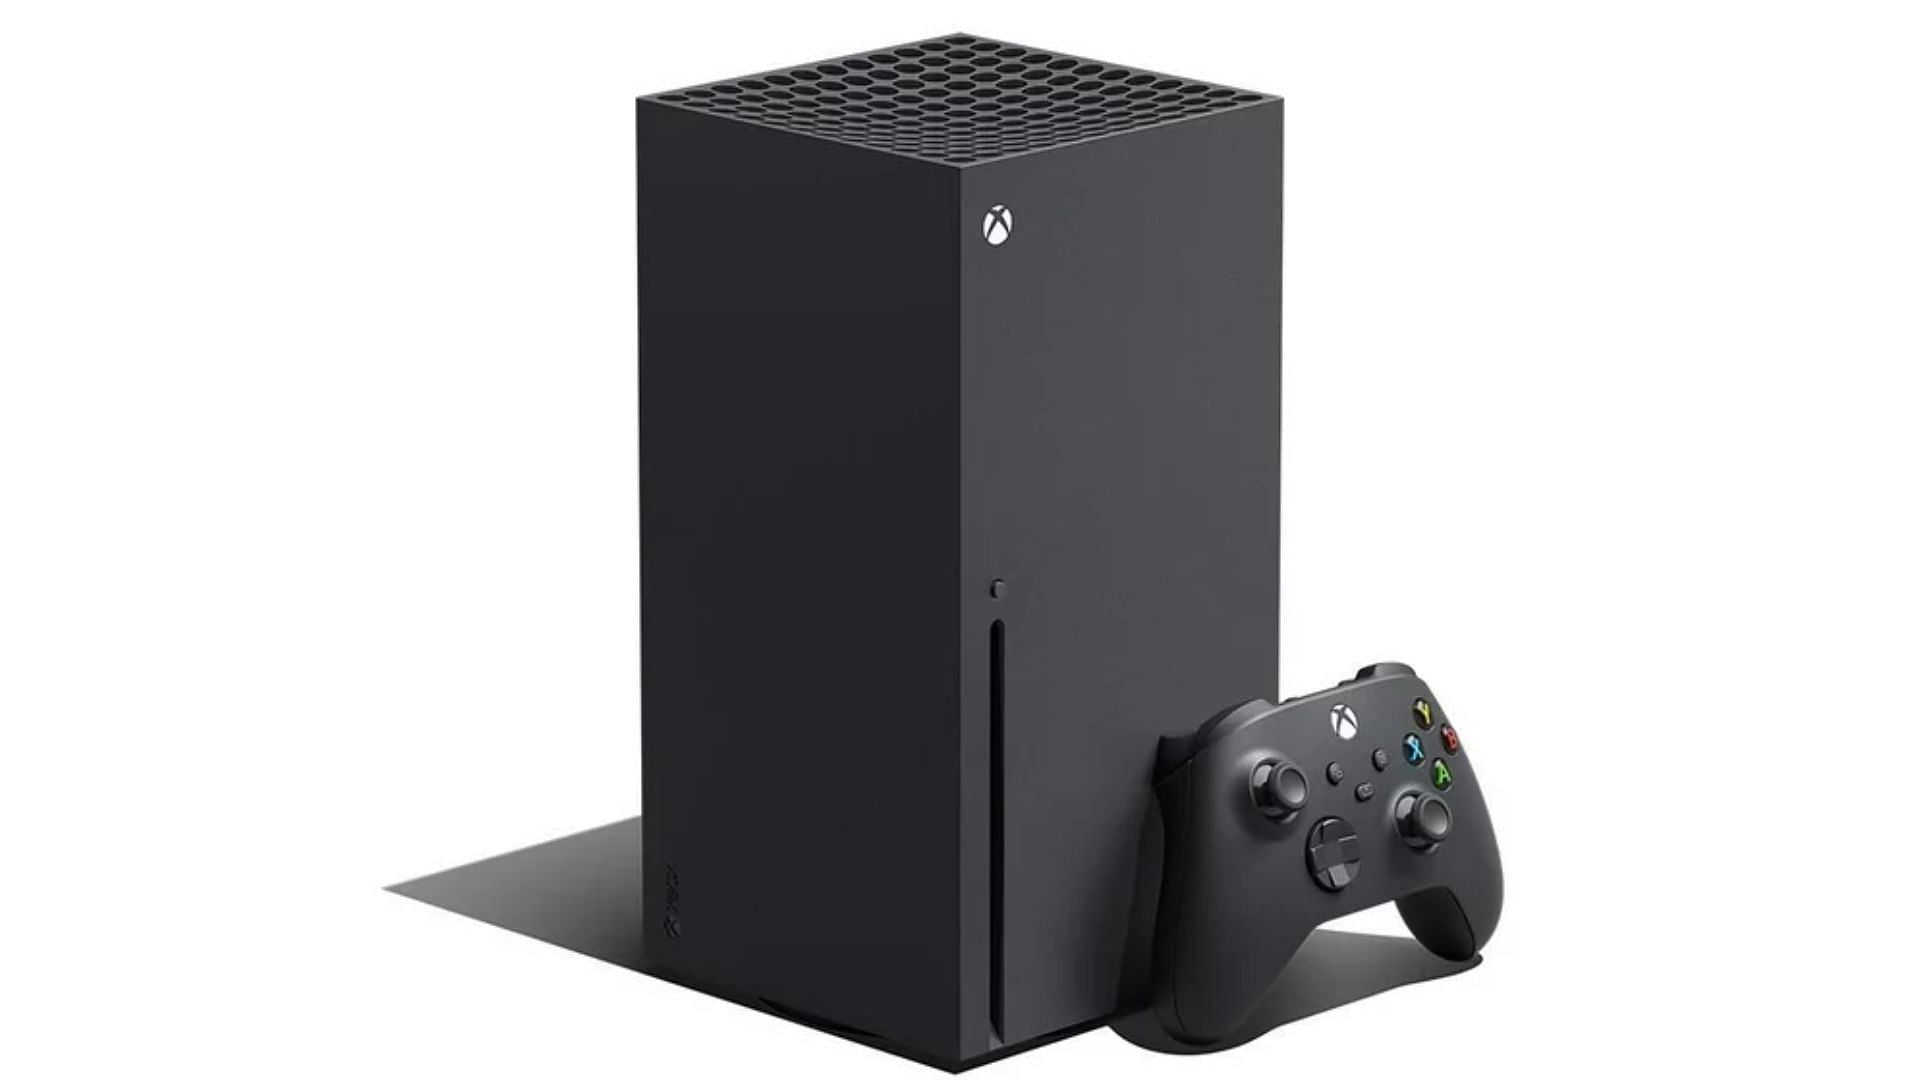 The Xbox Series X and Series S play Infinite Wealth at 60 FPS (Image via Walmart)